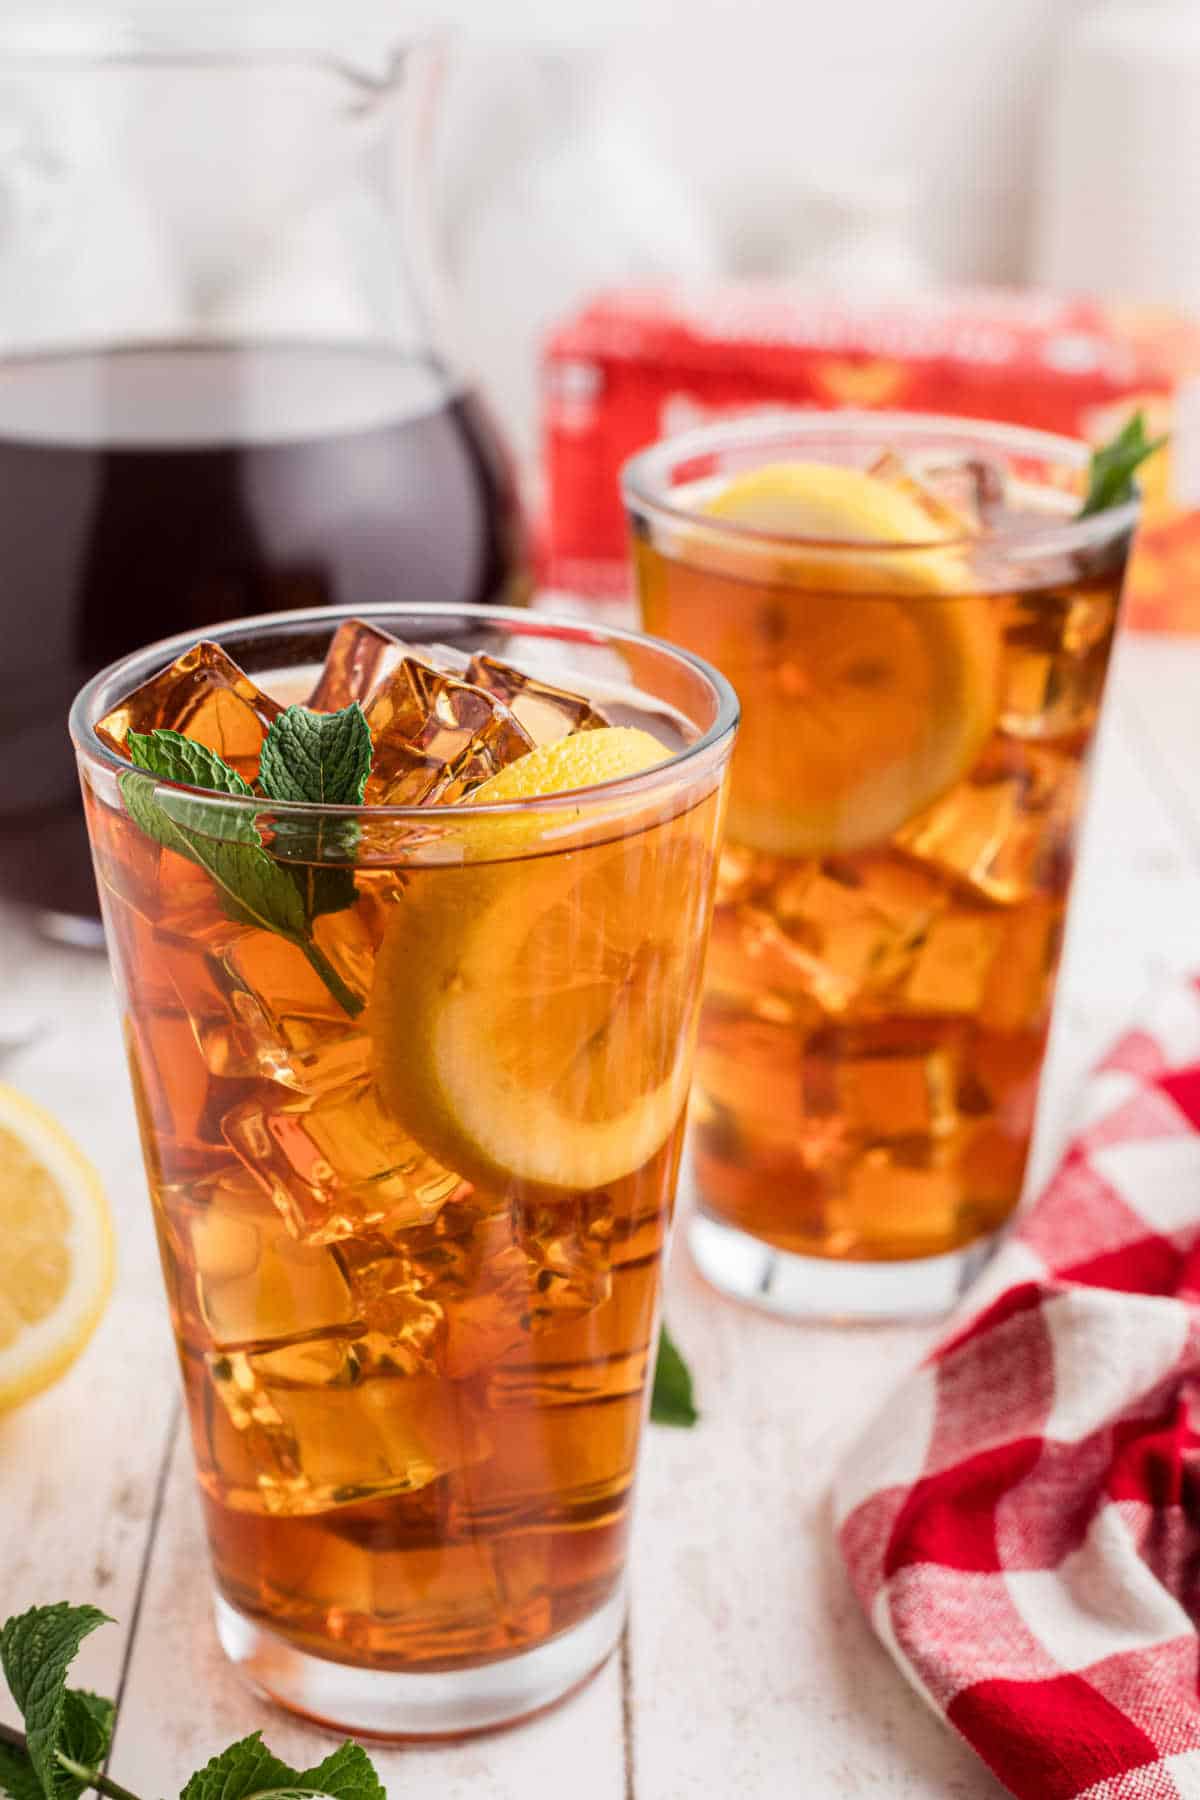 Tall glasses of sweet tea on ice with lemon and mint.